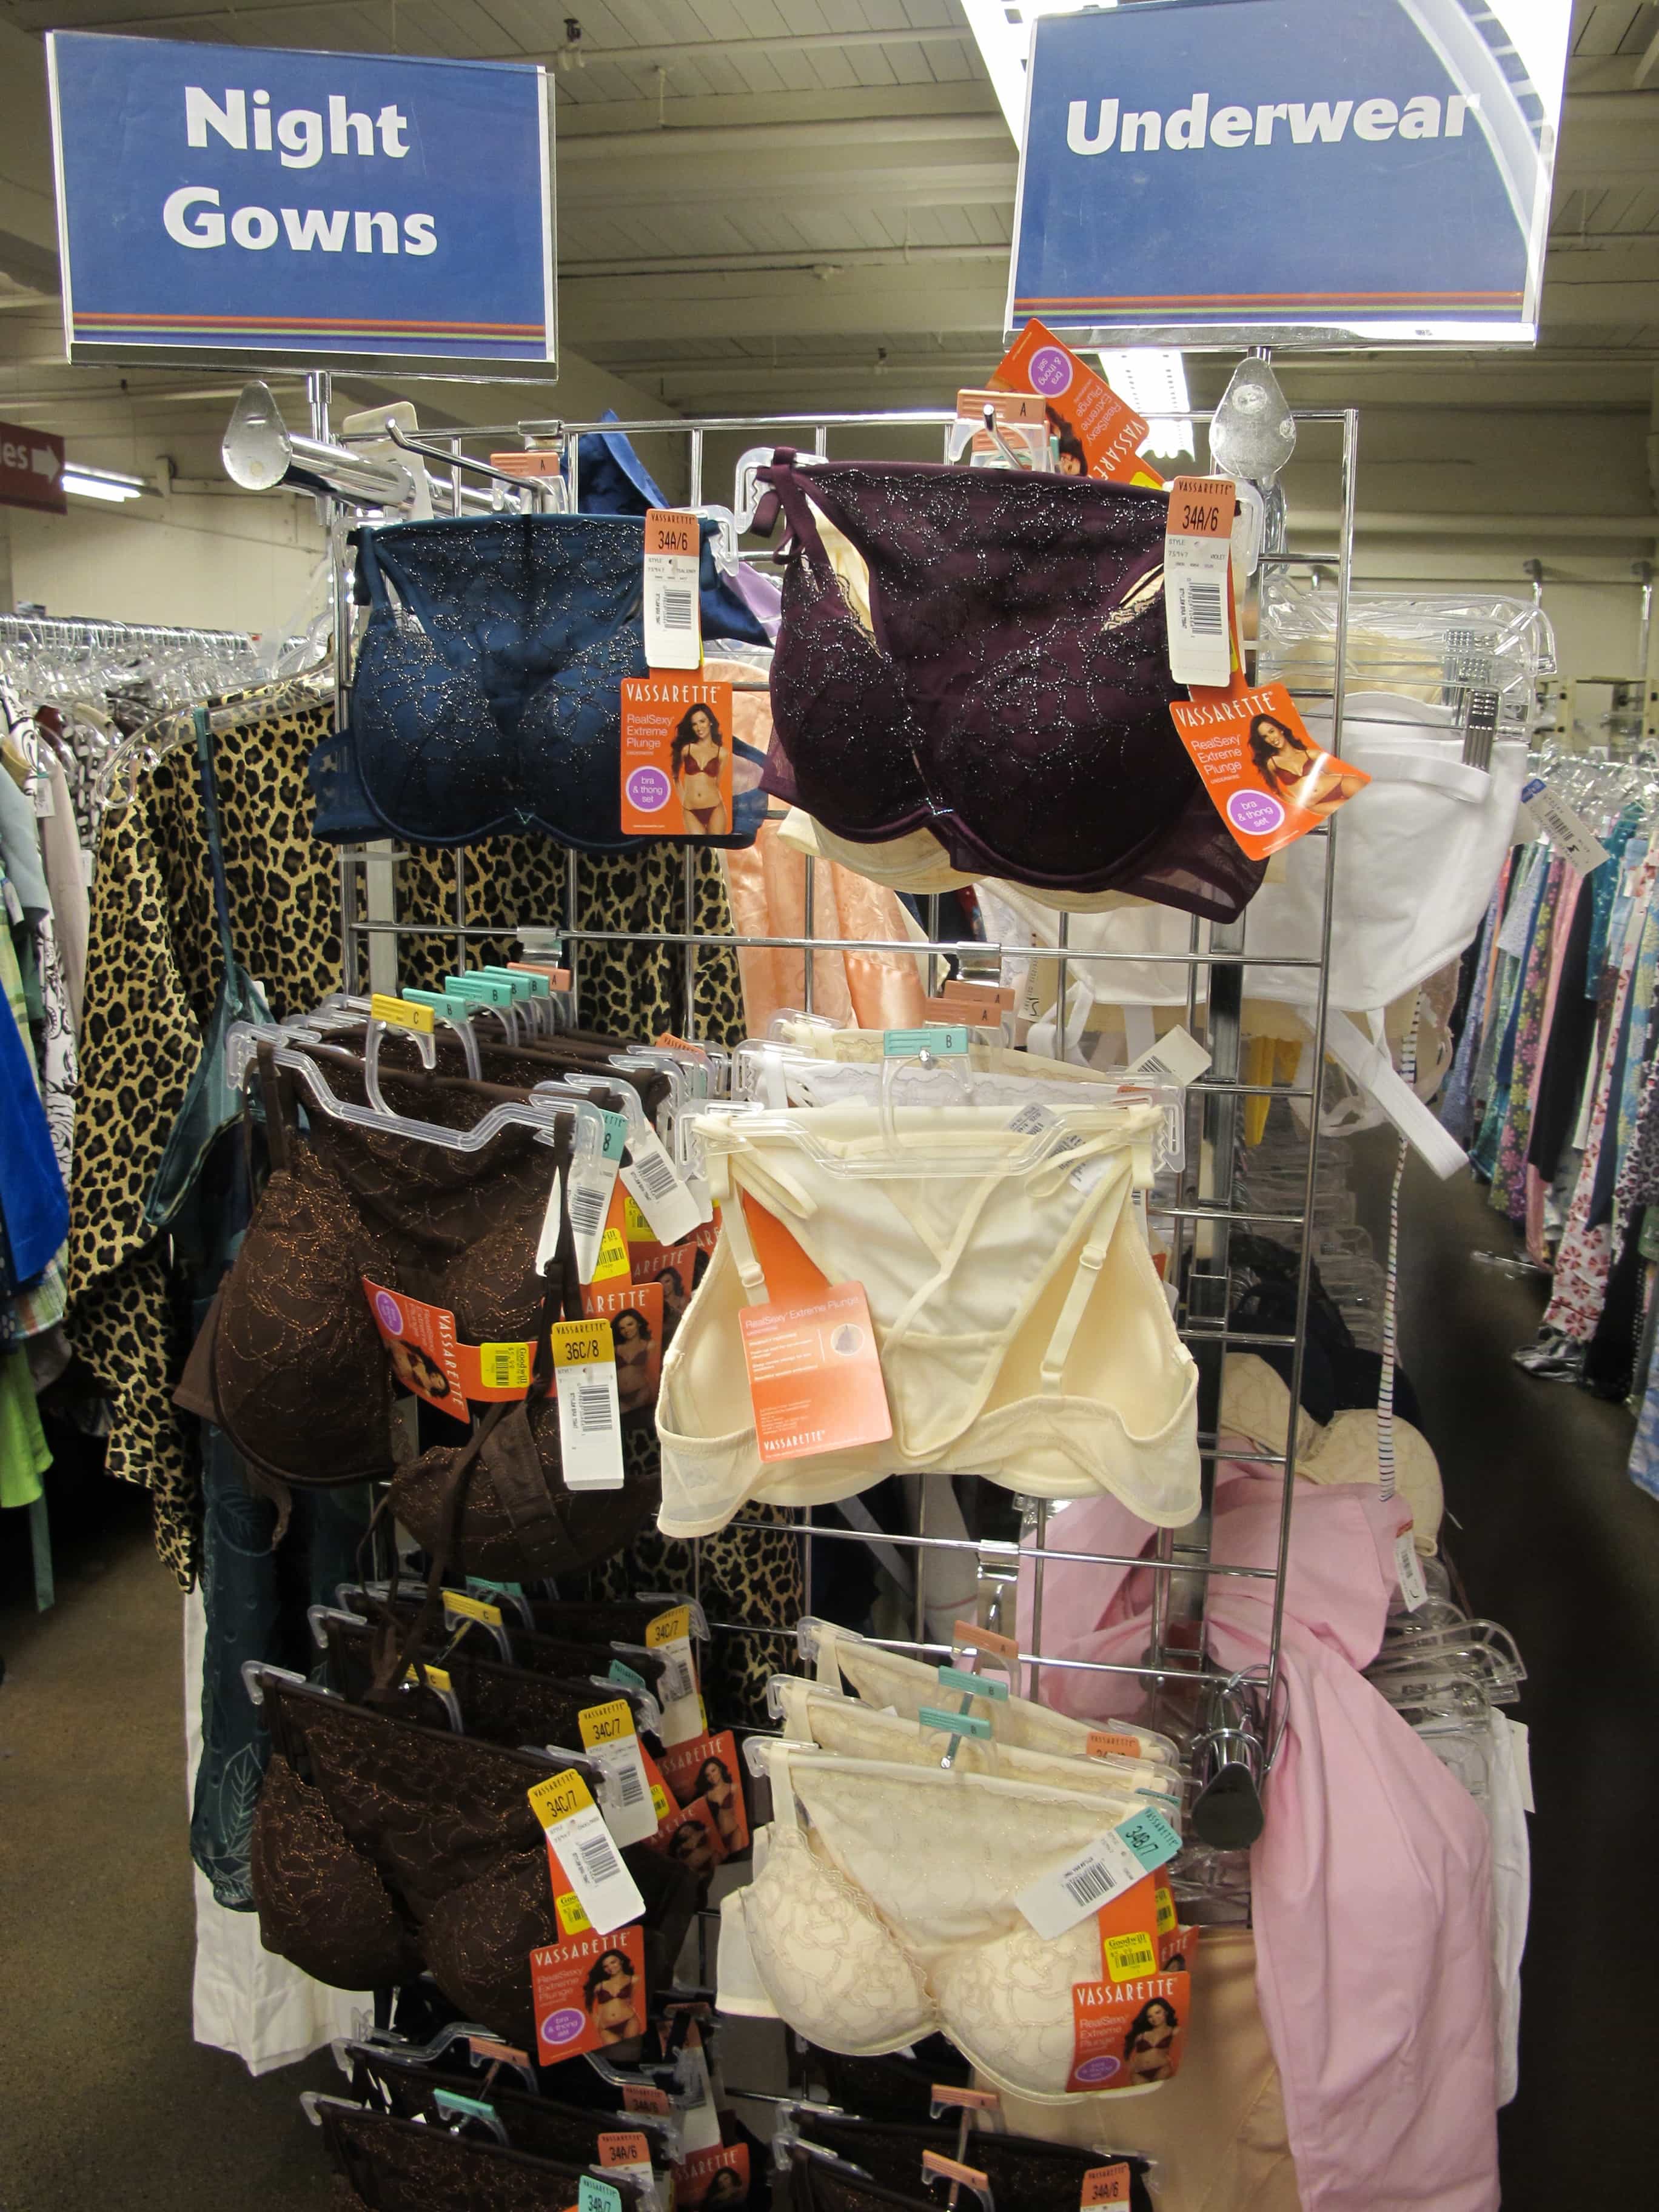 Best thrift store in Seattle - underwear and night gowns. - Thrift Diving